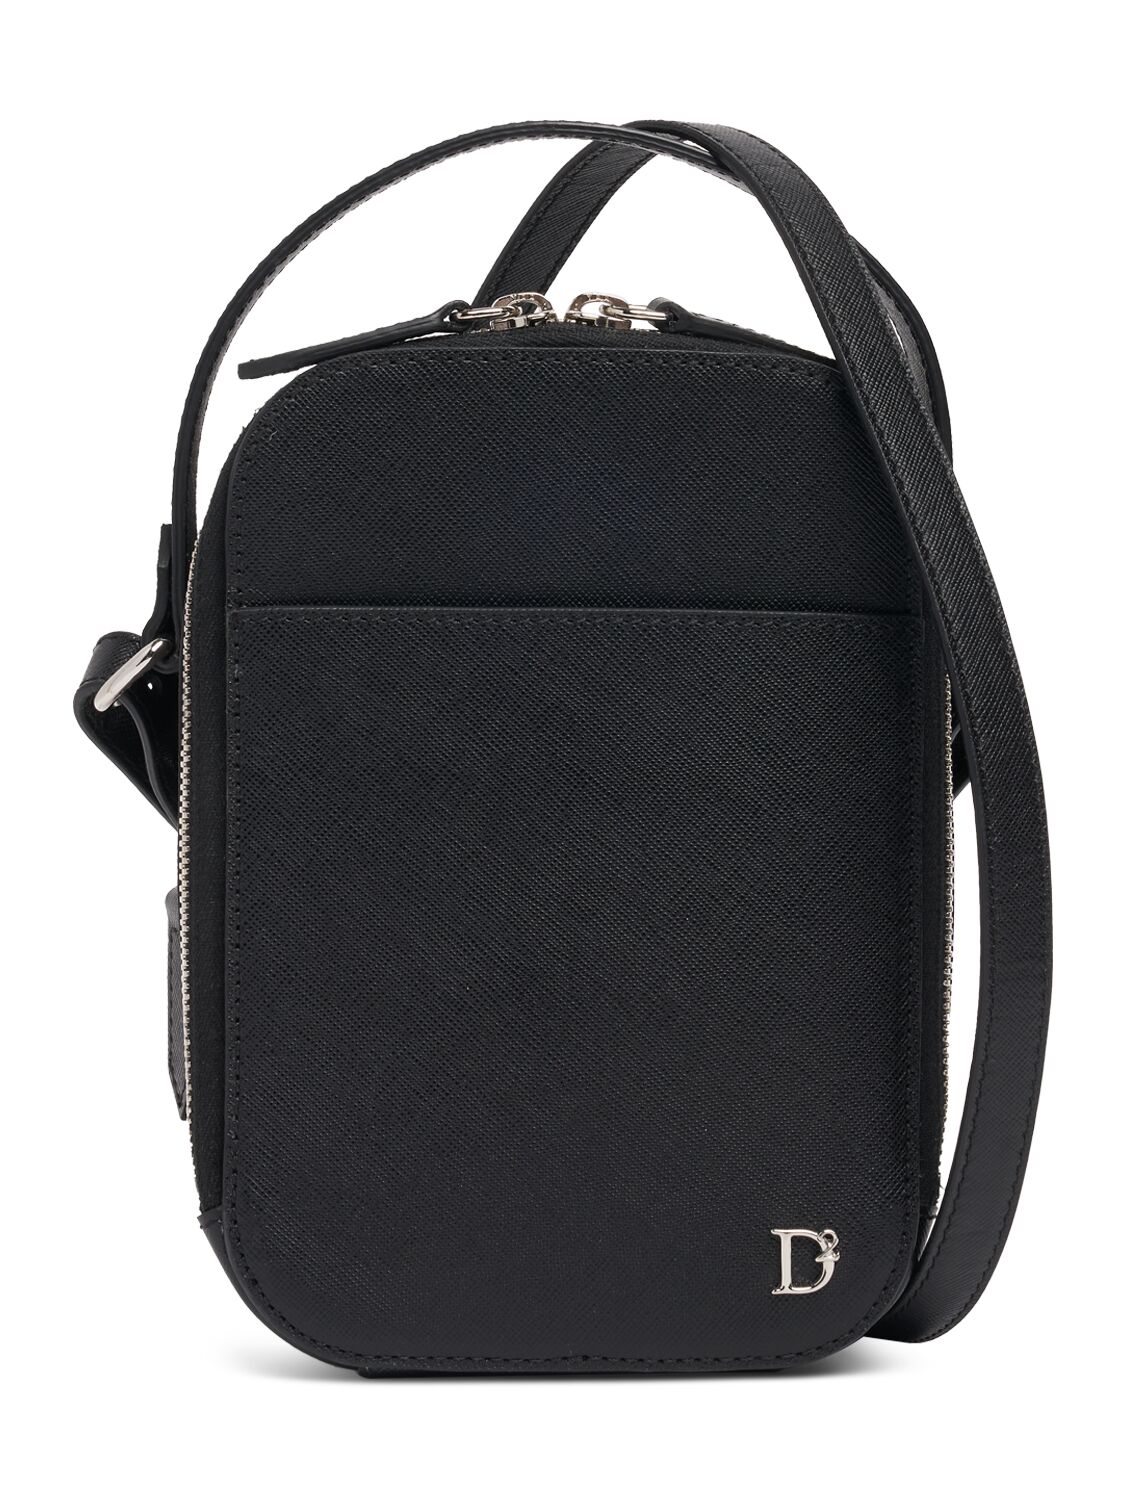 Image of D2 Leather Crossbody Bag